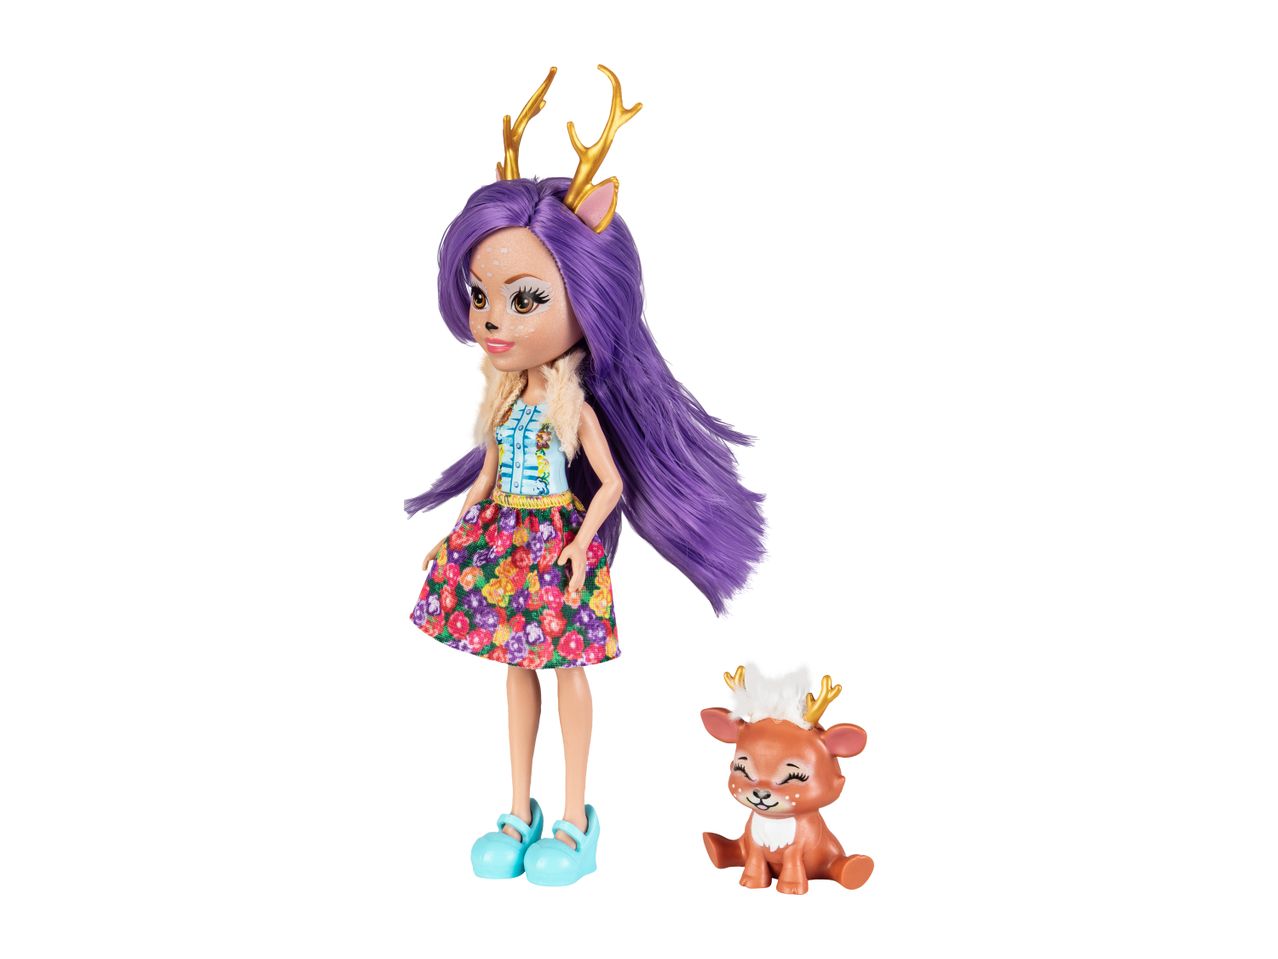 Go to full screen view: Enchantimals Doll - Image 9